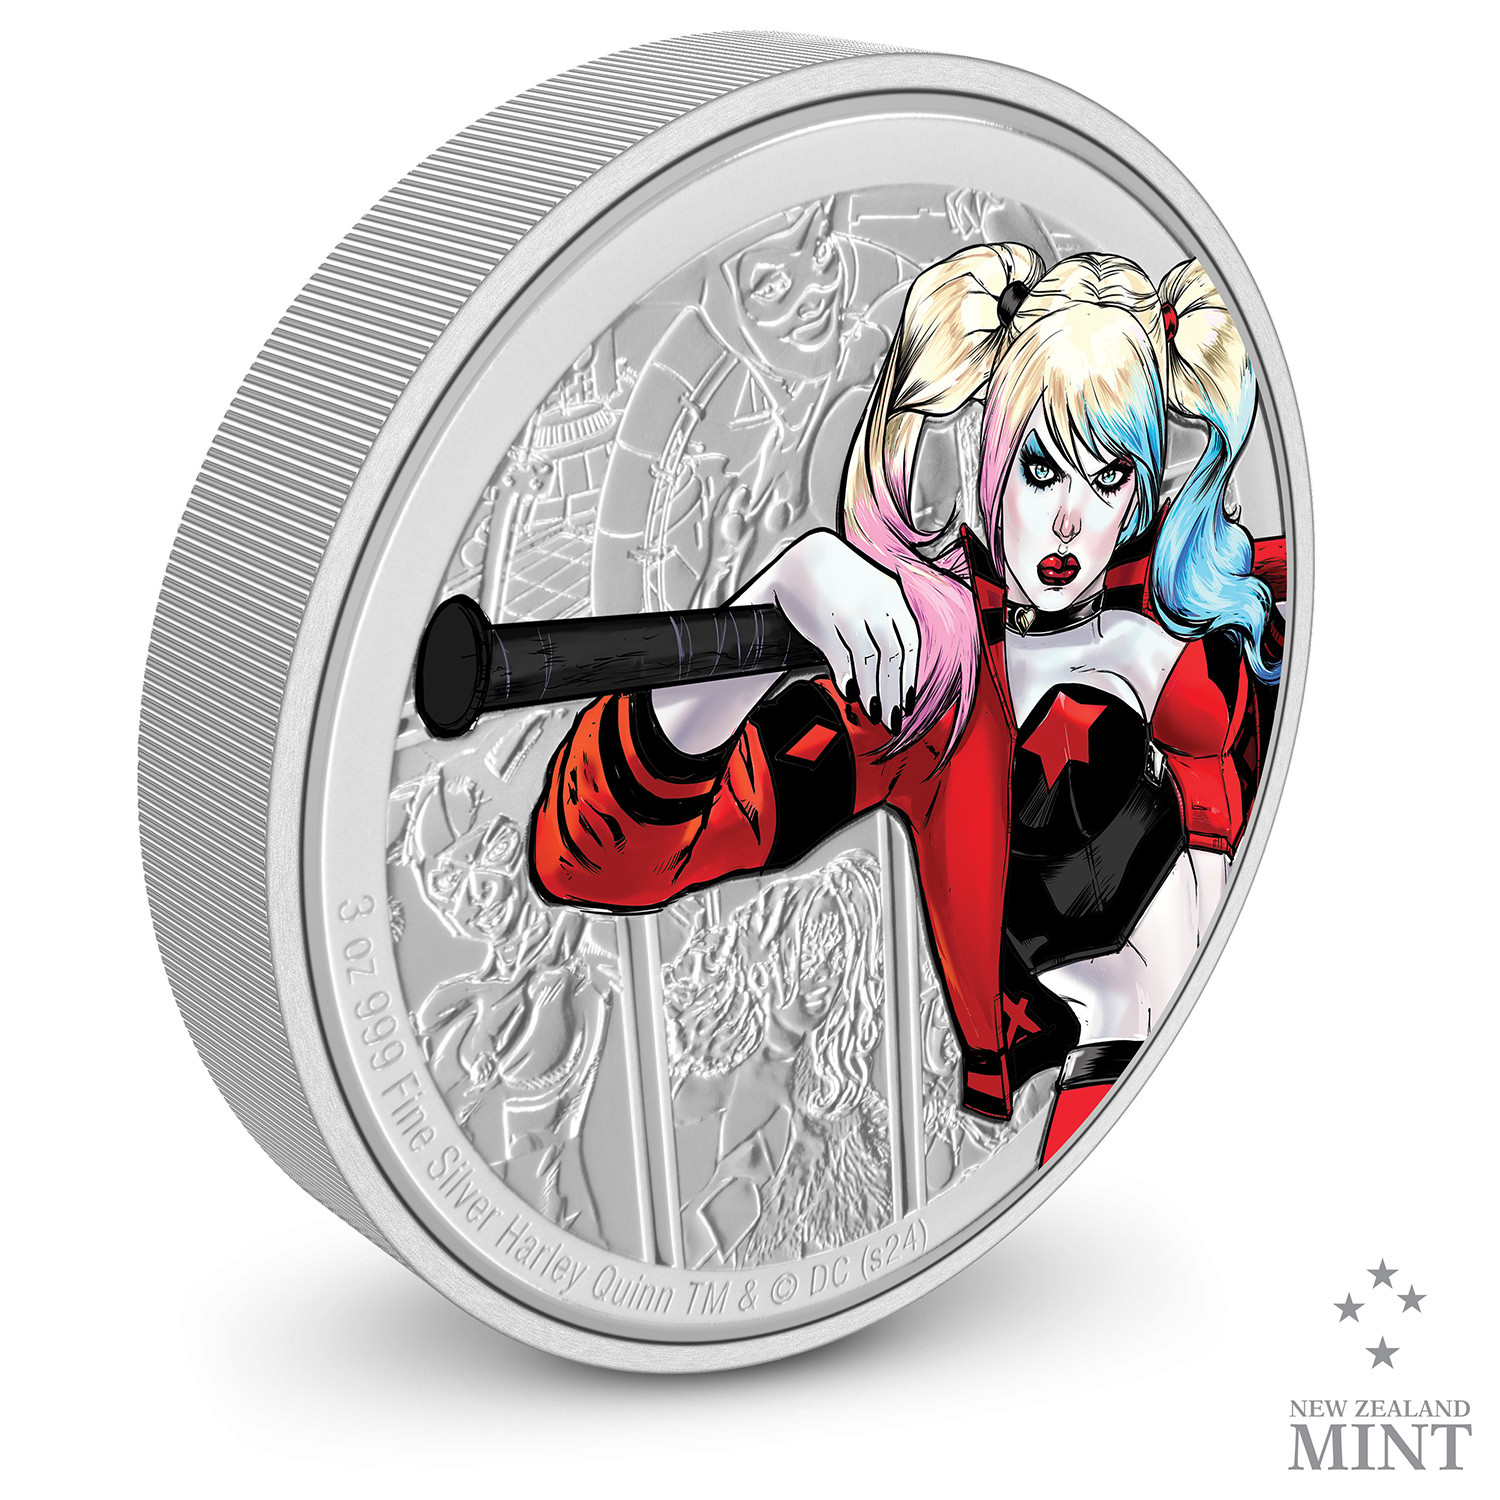 Harley Quinn 3oz Silver Coin (Prototype Shown) View 2